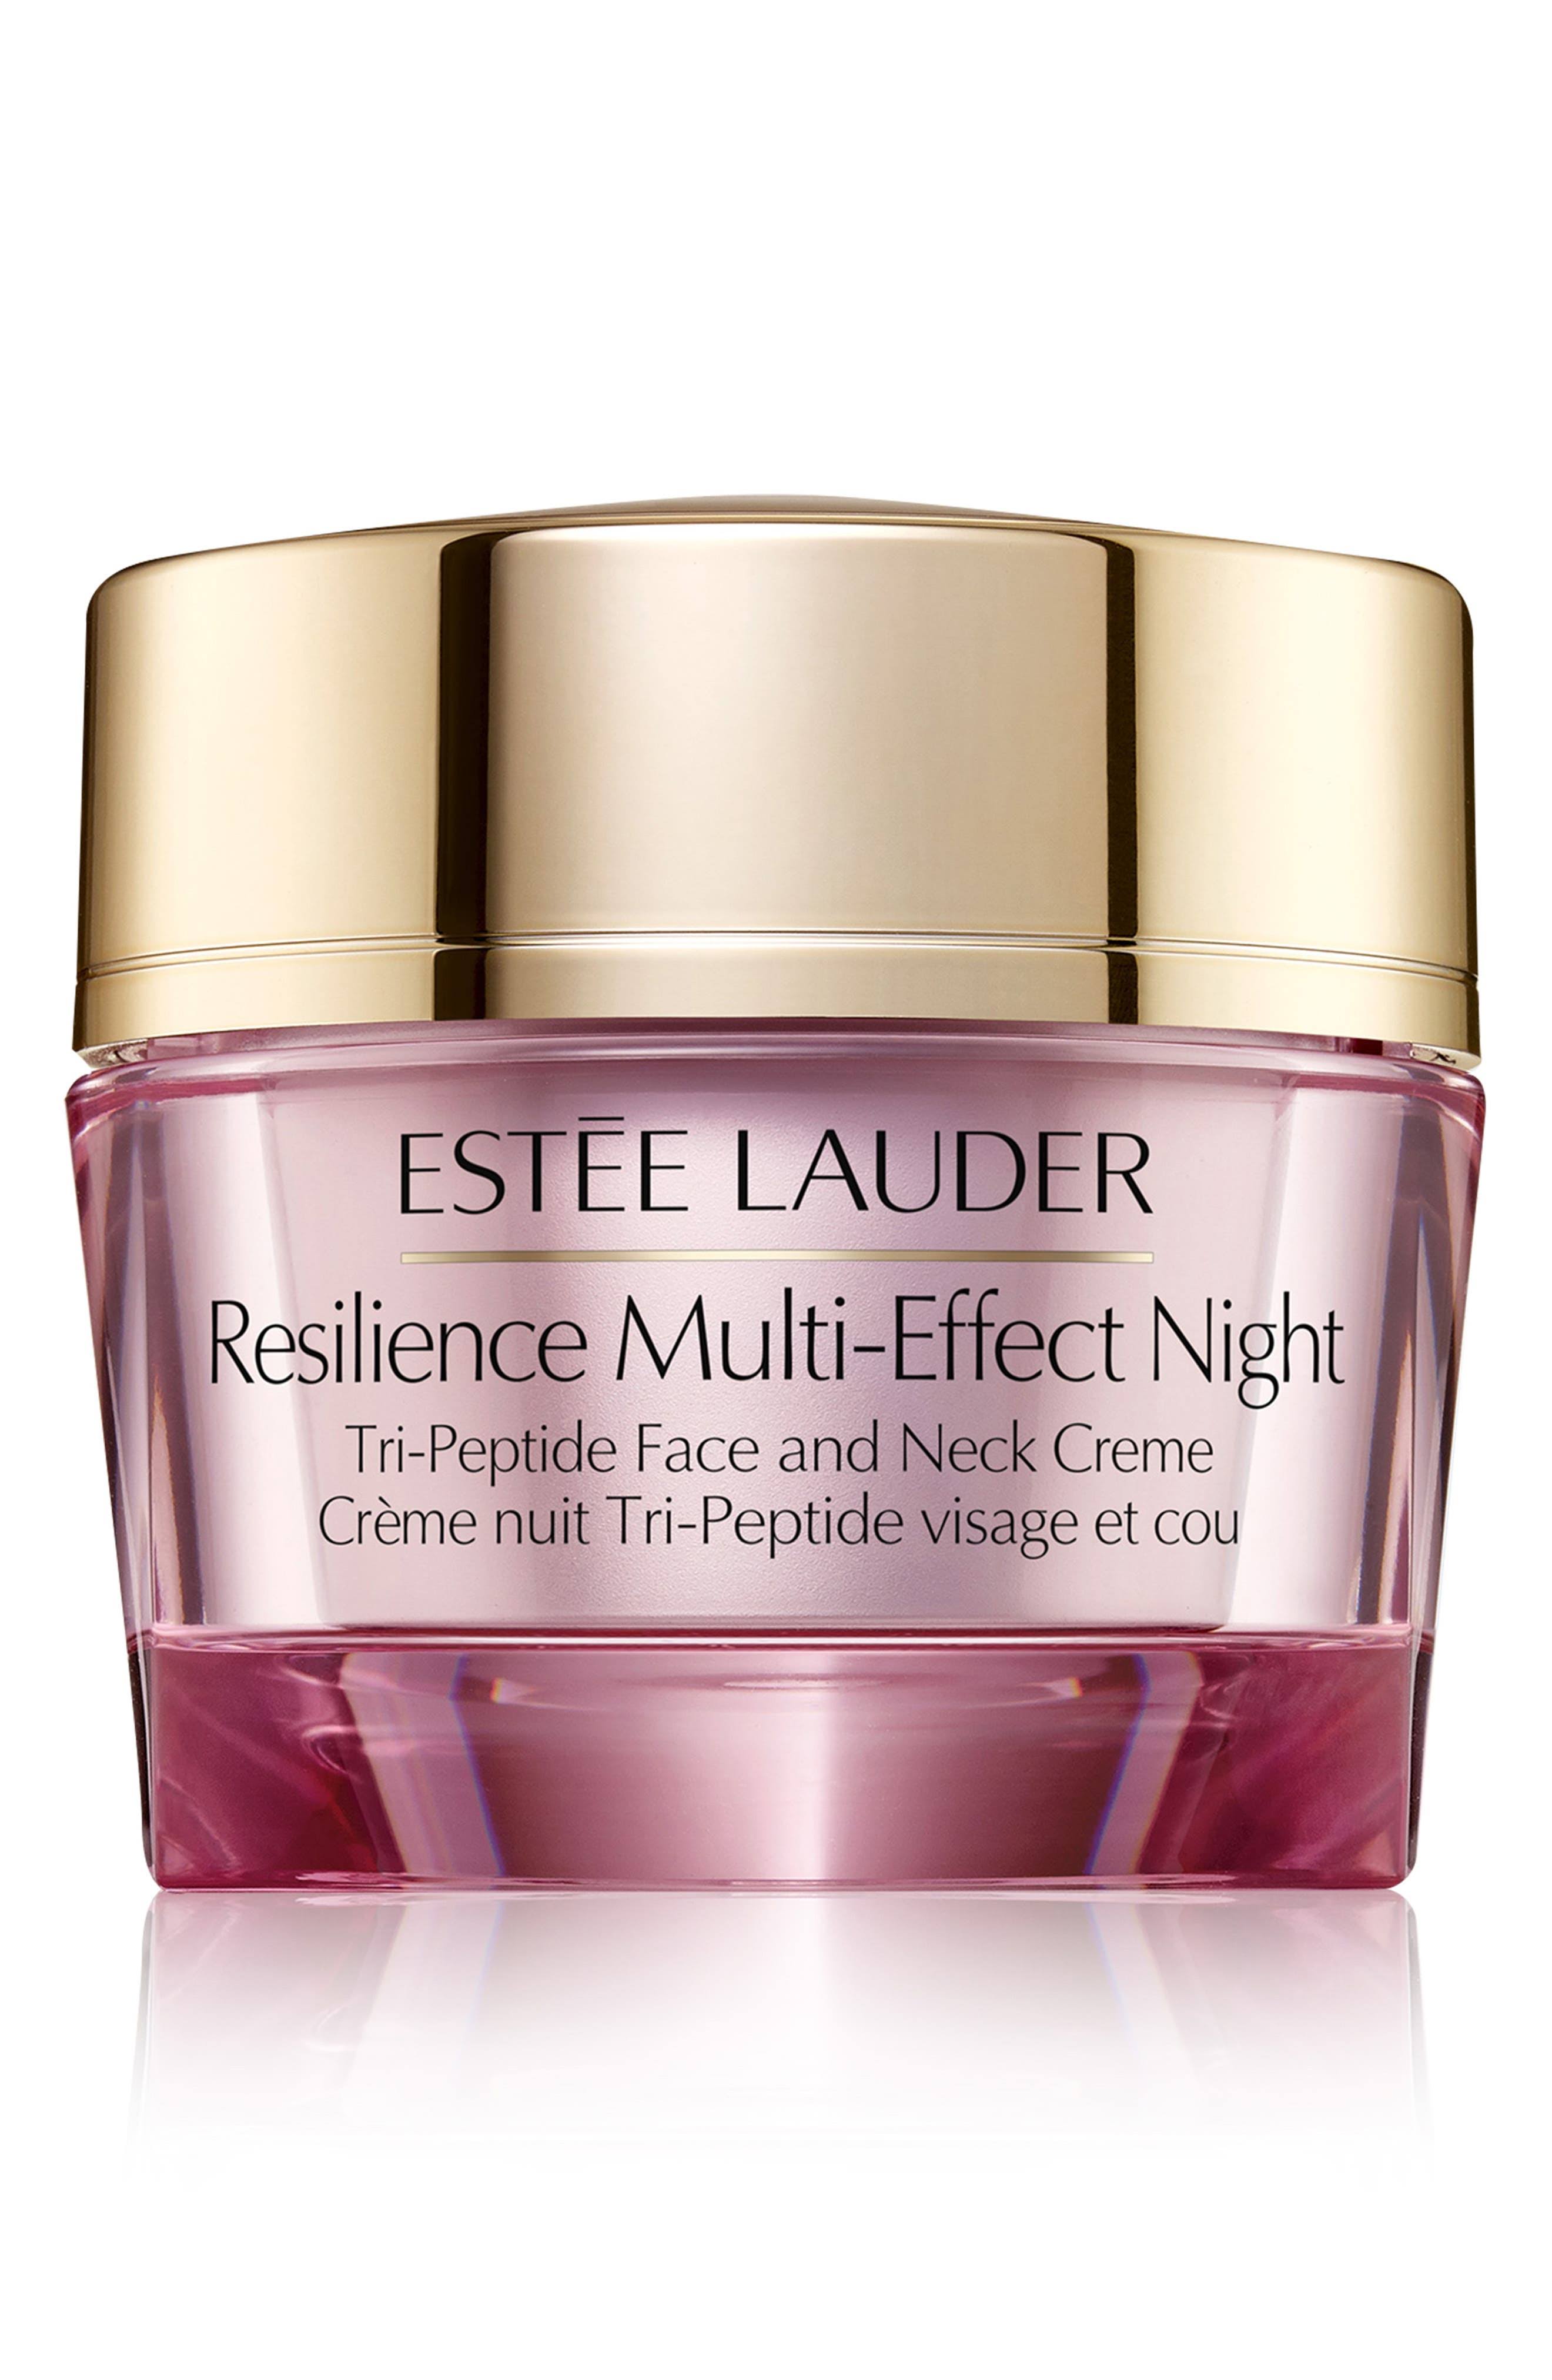 Estee Lauder Resilience Lift Night Lifting Firming Face and Neck Creme - 1.7oz